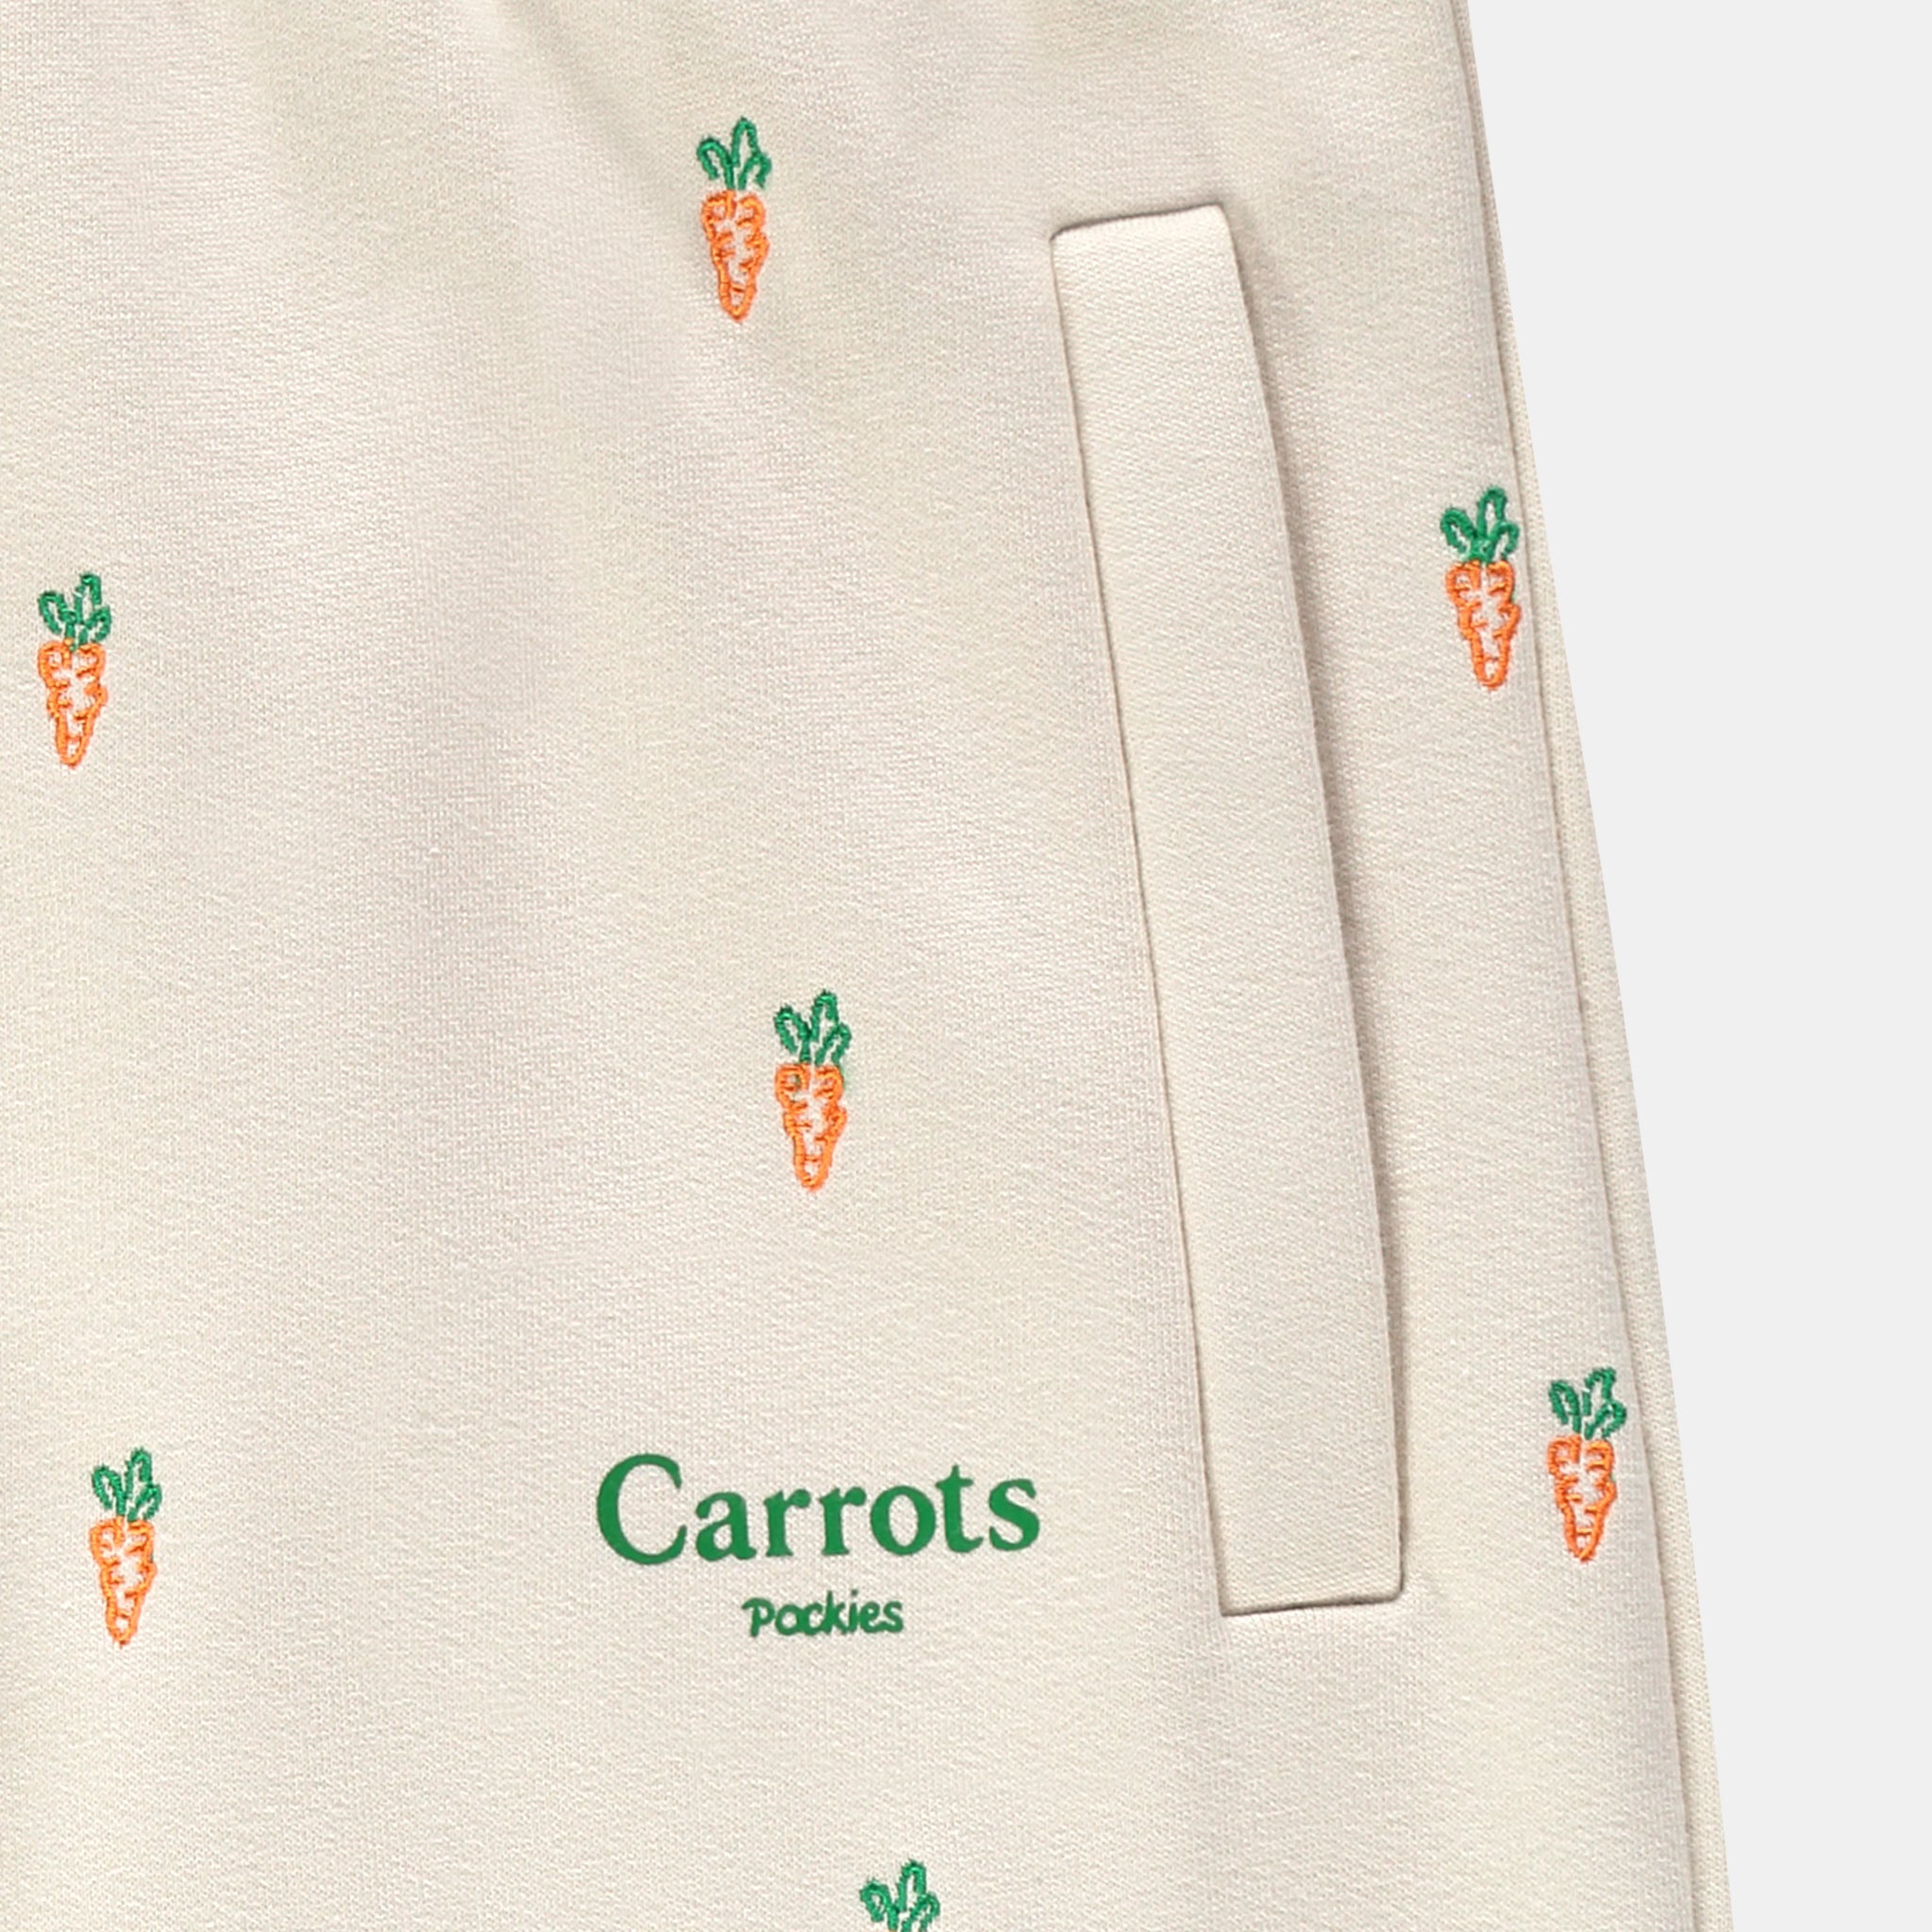 Carrots by Pockies Non-Joggers